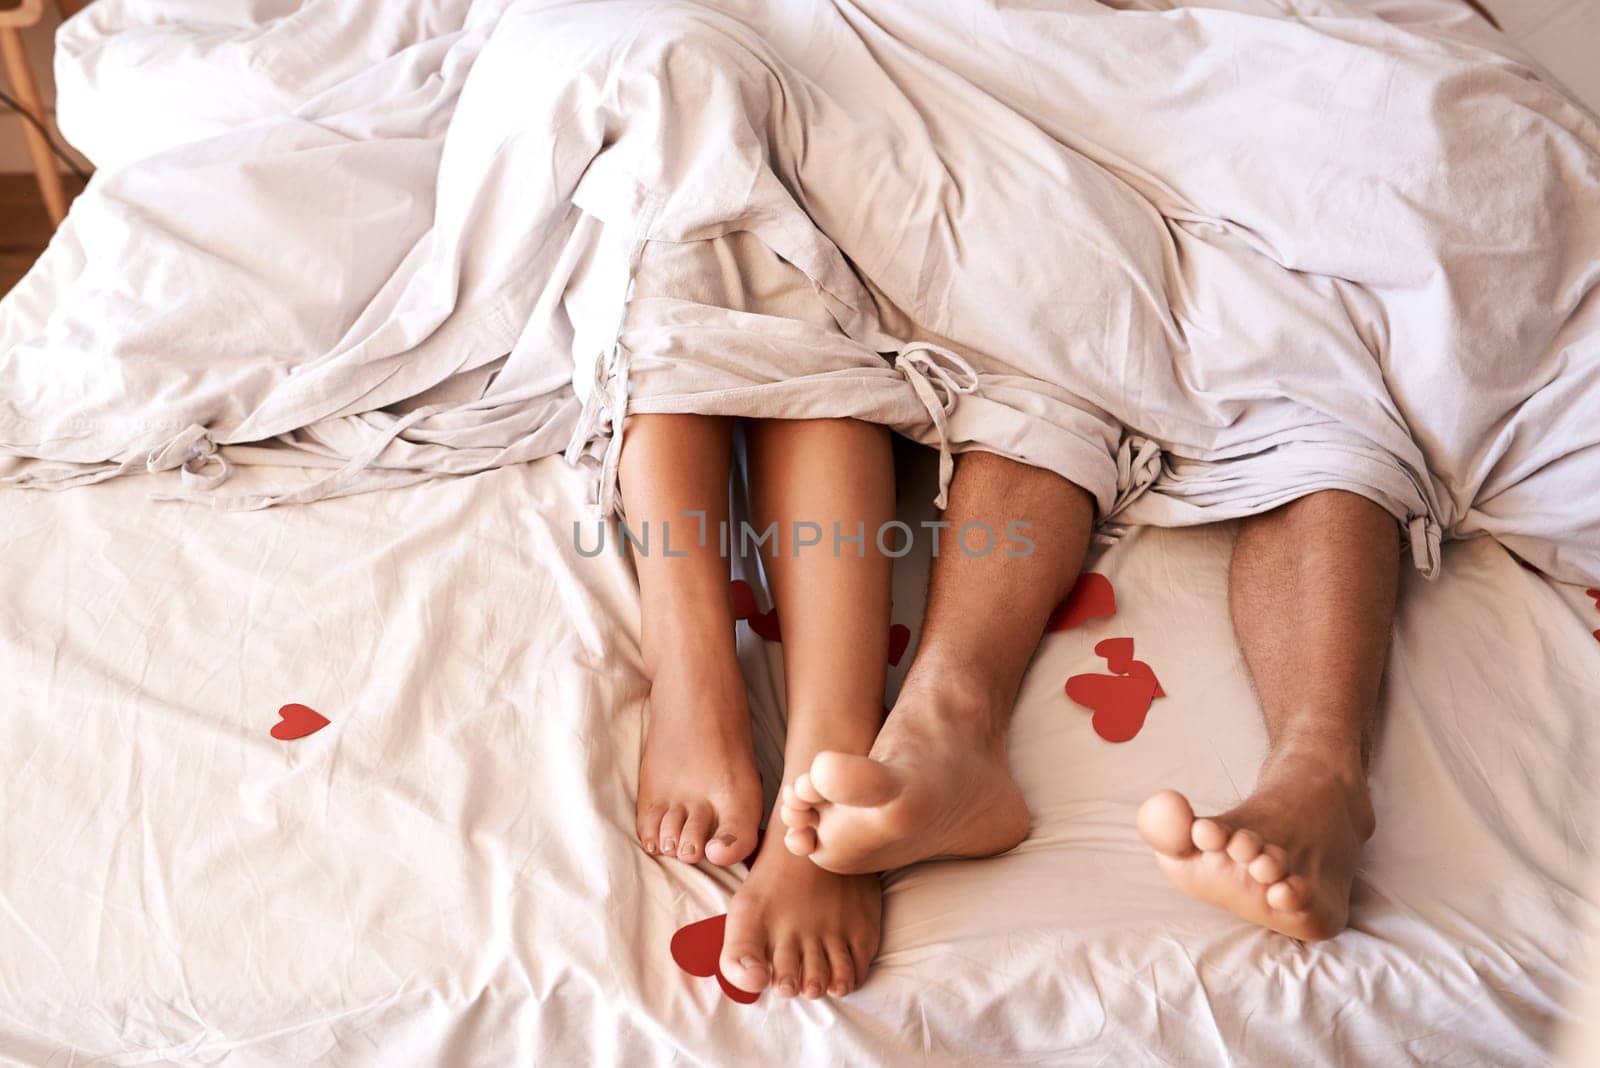 Bed, legs and couple with Valentines Day heart, romance or emoji icon for home love, intimacy and honeymoon affection. Marriage bond, relax sleep and top view feet of people sleeping in hotel bedroom by YuriArcurs